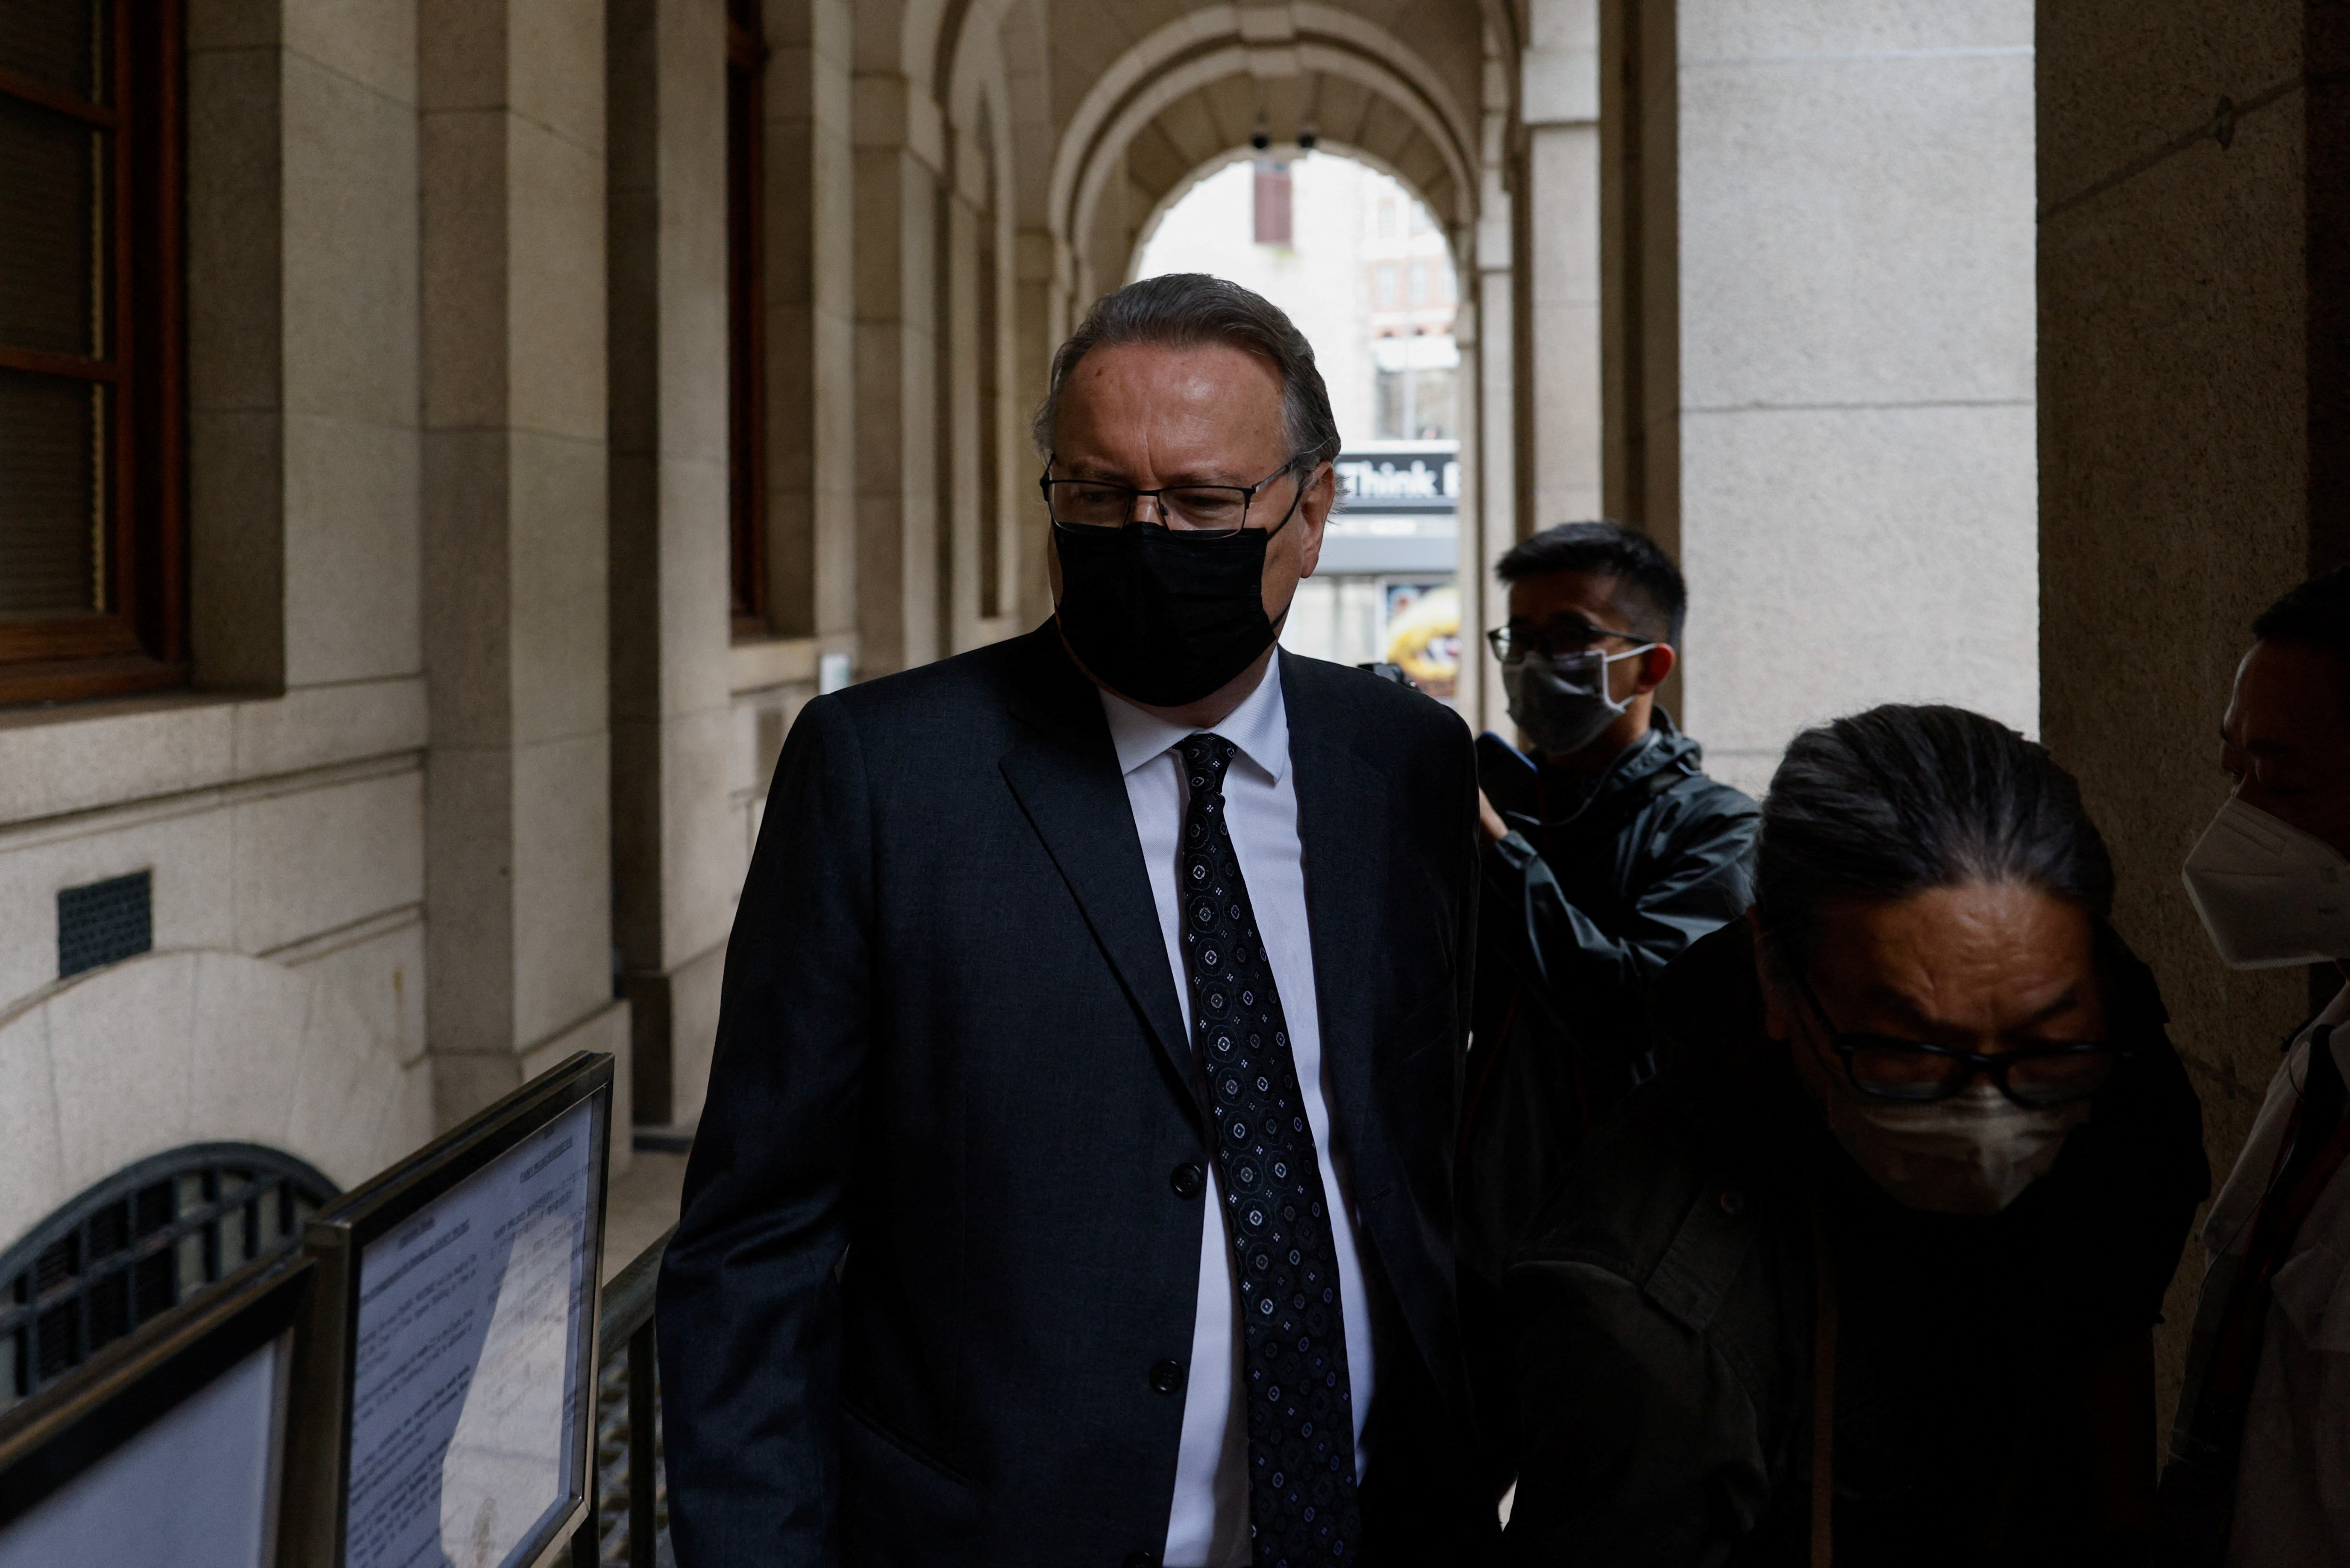 British King's Counsel Timothy Owen arrives at the Court of Final Appeal during a hearing against the admission of Owen in Apple Daily founder Jimmy Lai's national security trial in Hong Kong